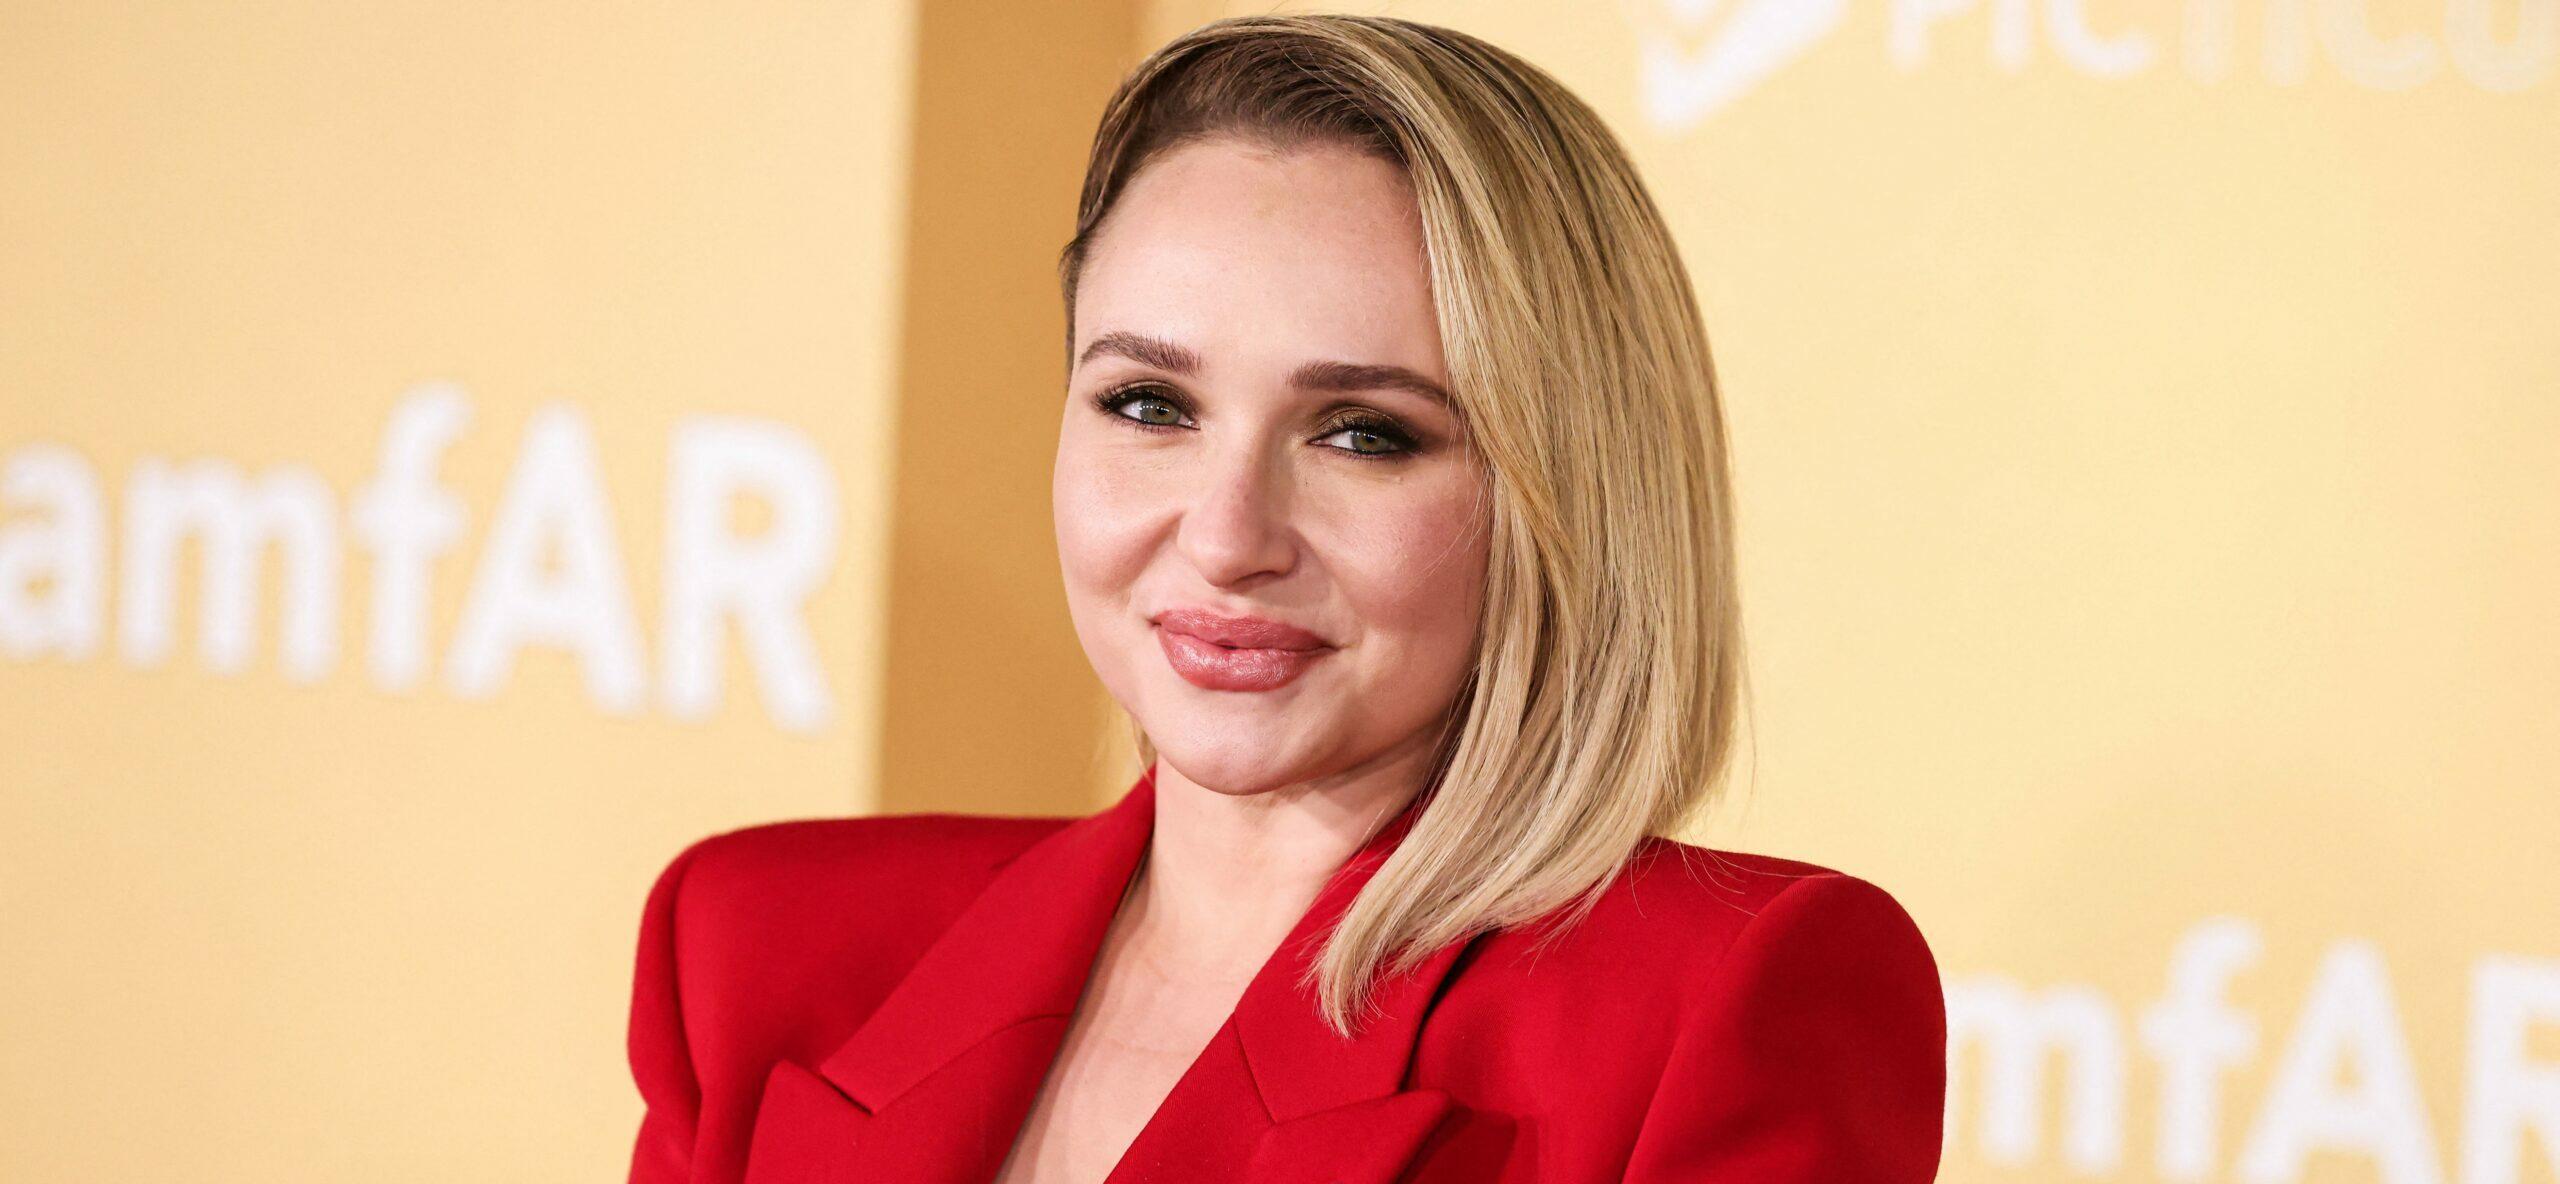 Hayden Panettiere Speaks On Getting Help for Jaundice Amid Opioid And Alcohol Addiction